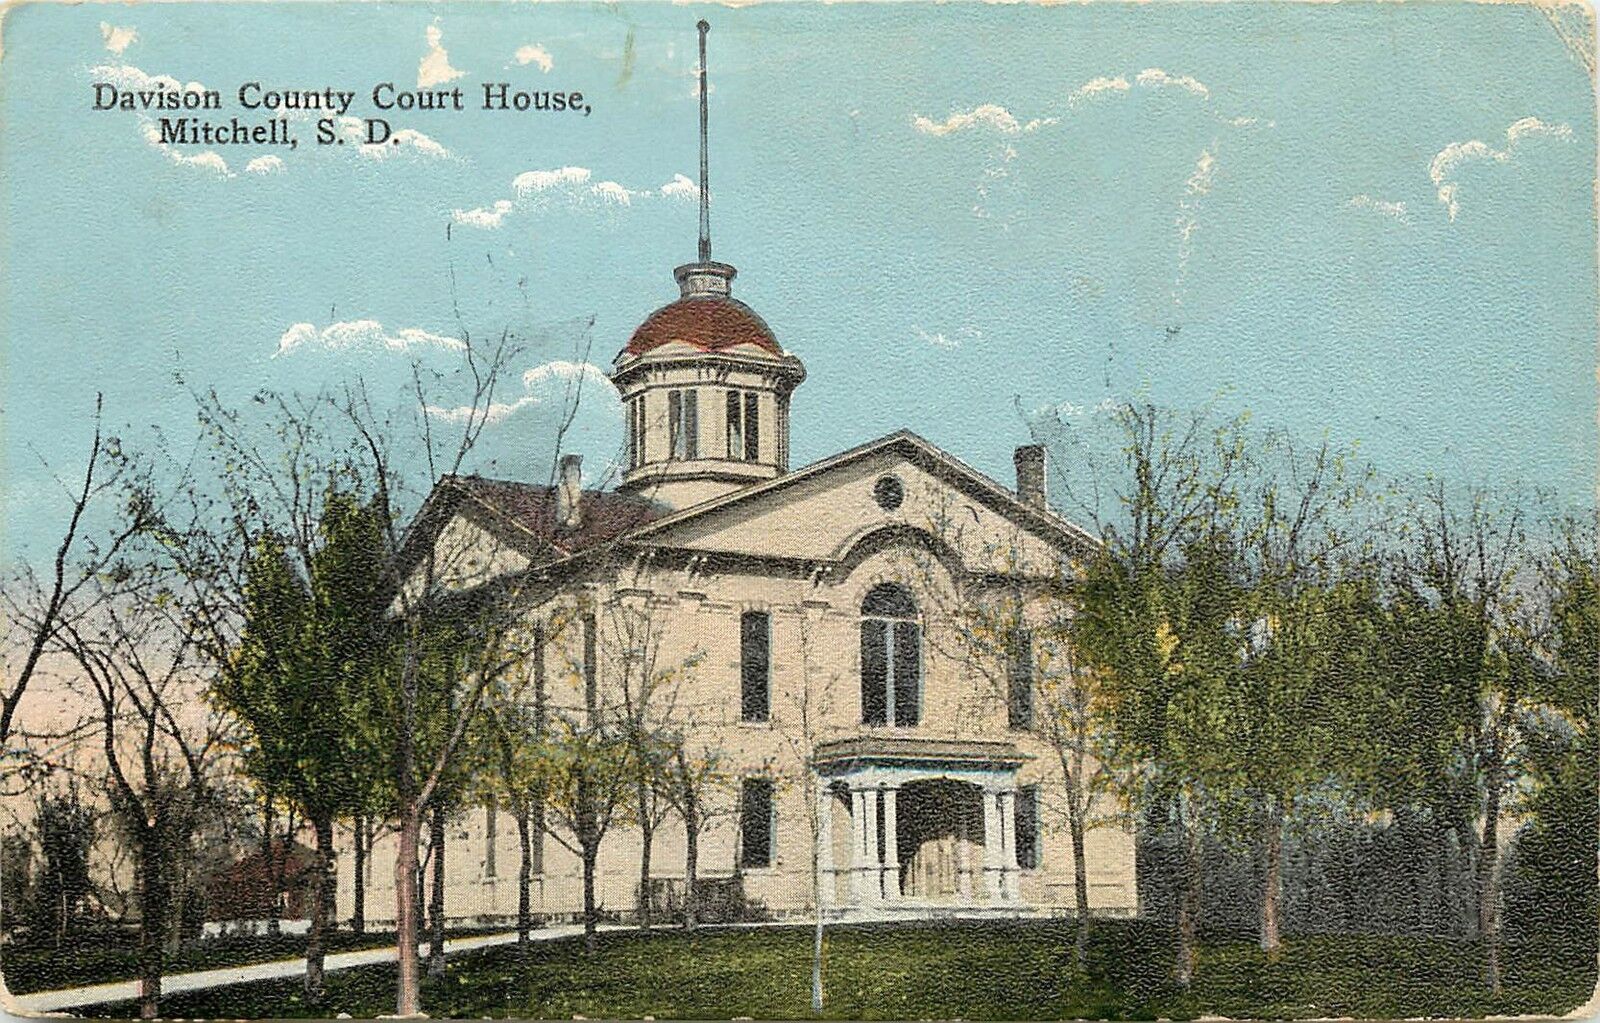 c1915 Printed Postcard; Davison County Court House, Mitchell SD Posted